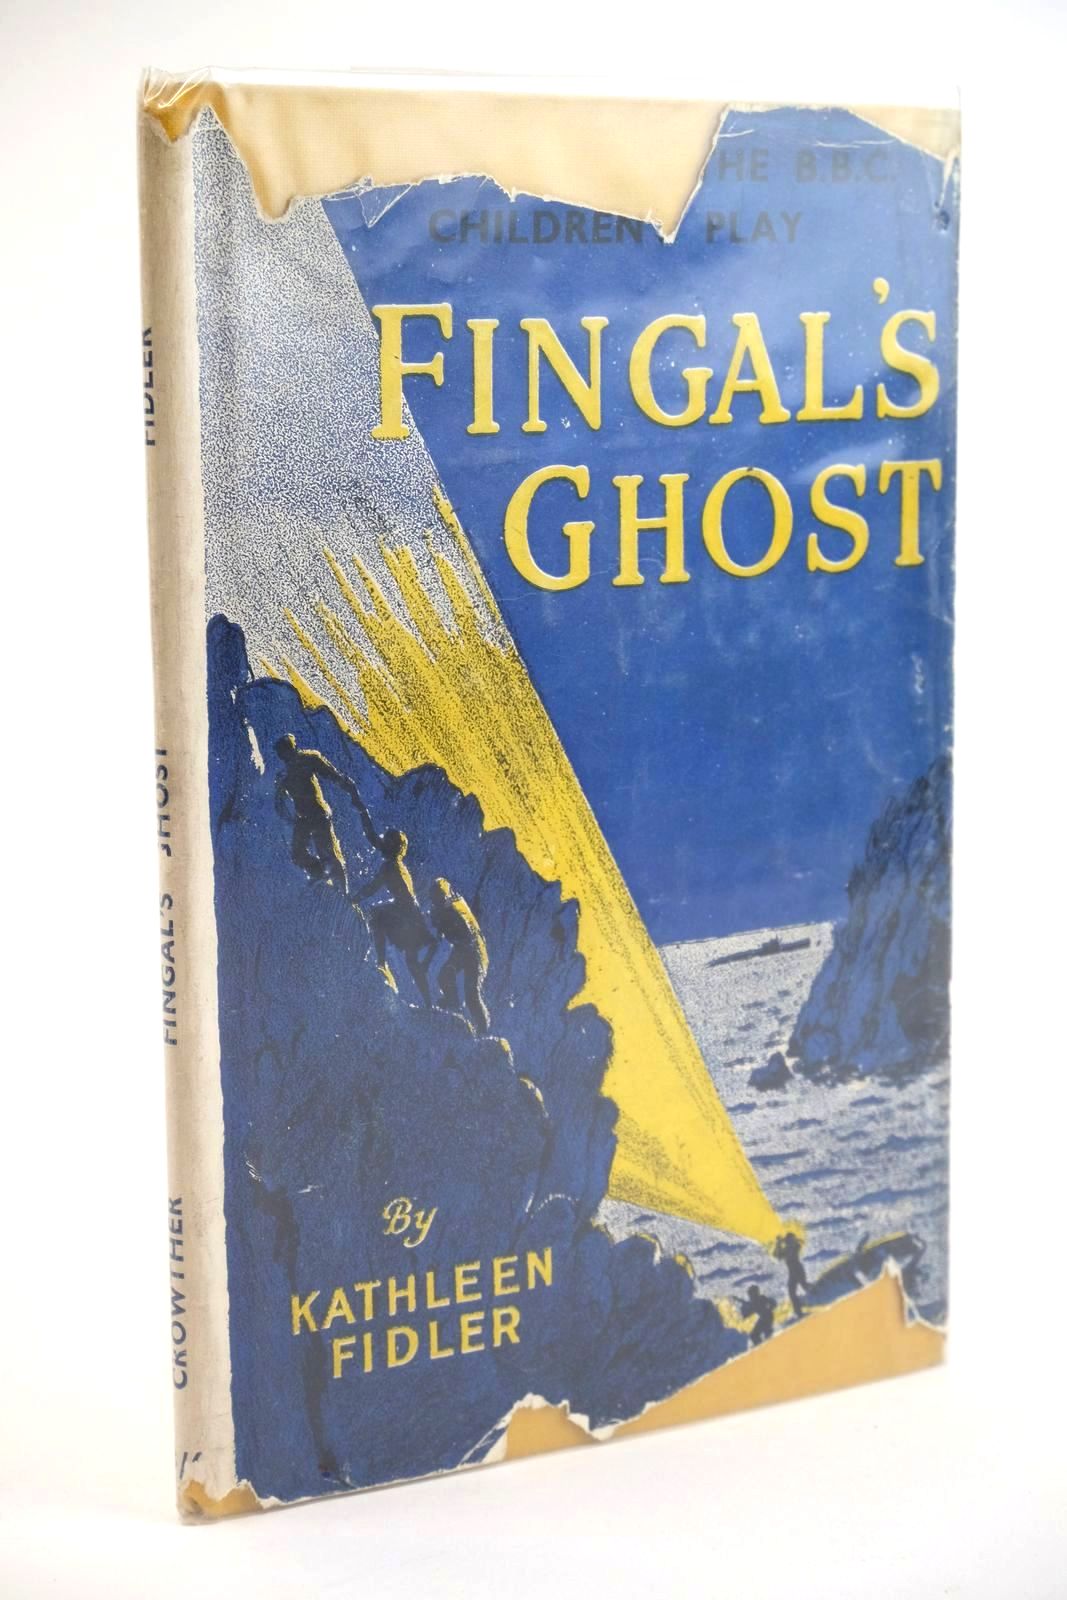 Photo of FINGAL'S GHOST written by Fidler, Kathleen published by John Crowther Ltd. (STOCK CODE: 1323355)  for sale by Stella & Rose's Books